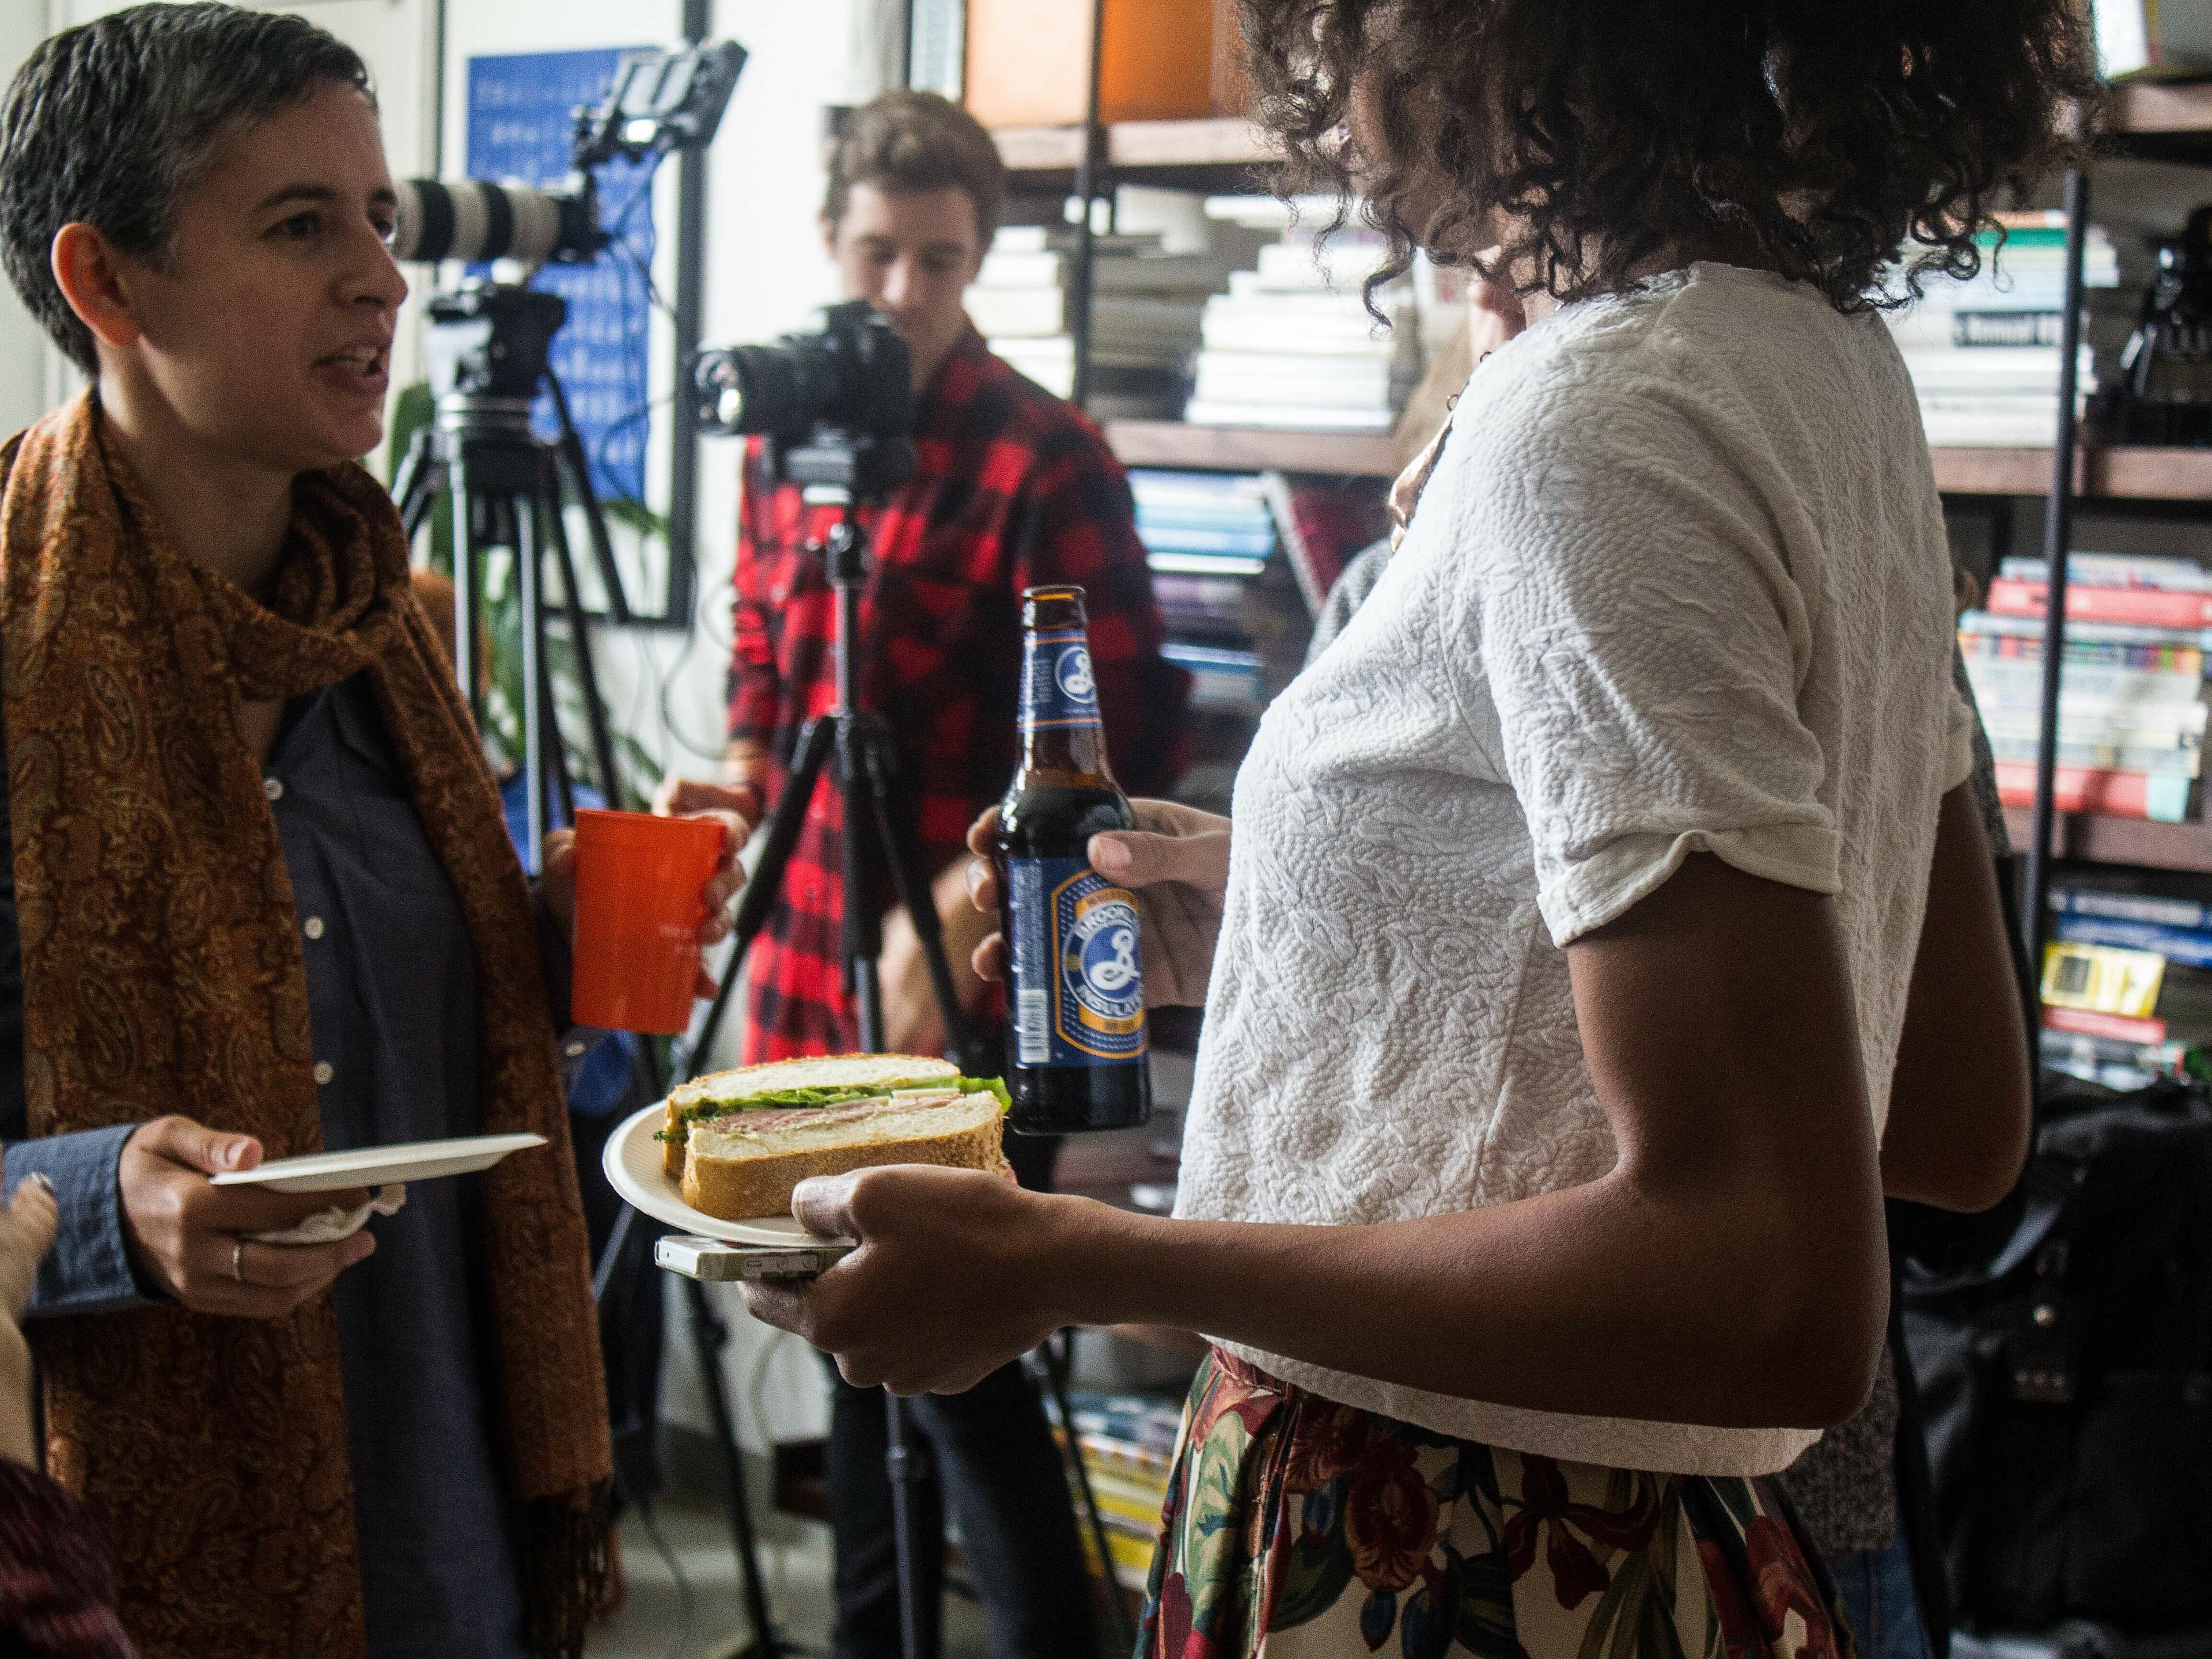 People are gathered in an indoor setting with shelves filled with books and objects in the background. A woman is holding a plate with a sandwich and a bottle of beer, while another person holds a red mug. A man in a red flannel shirt operates a camera in the background.